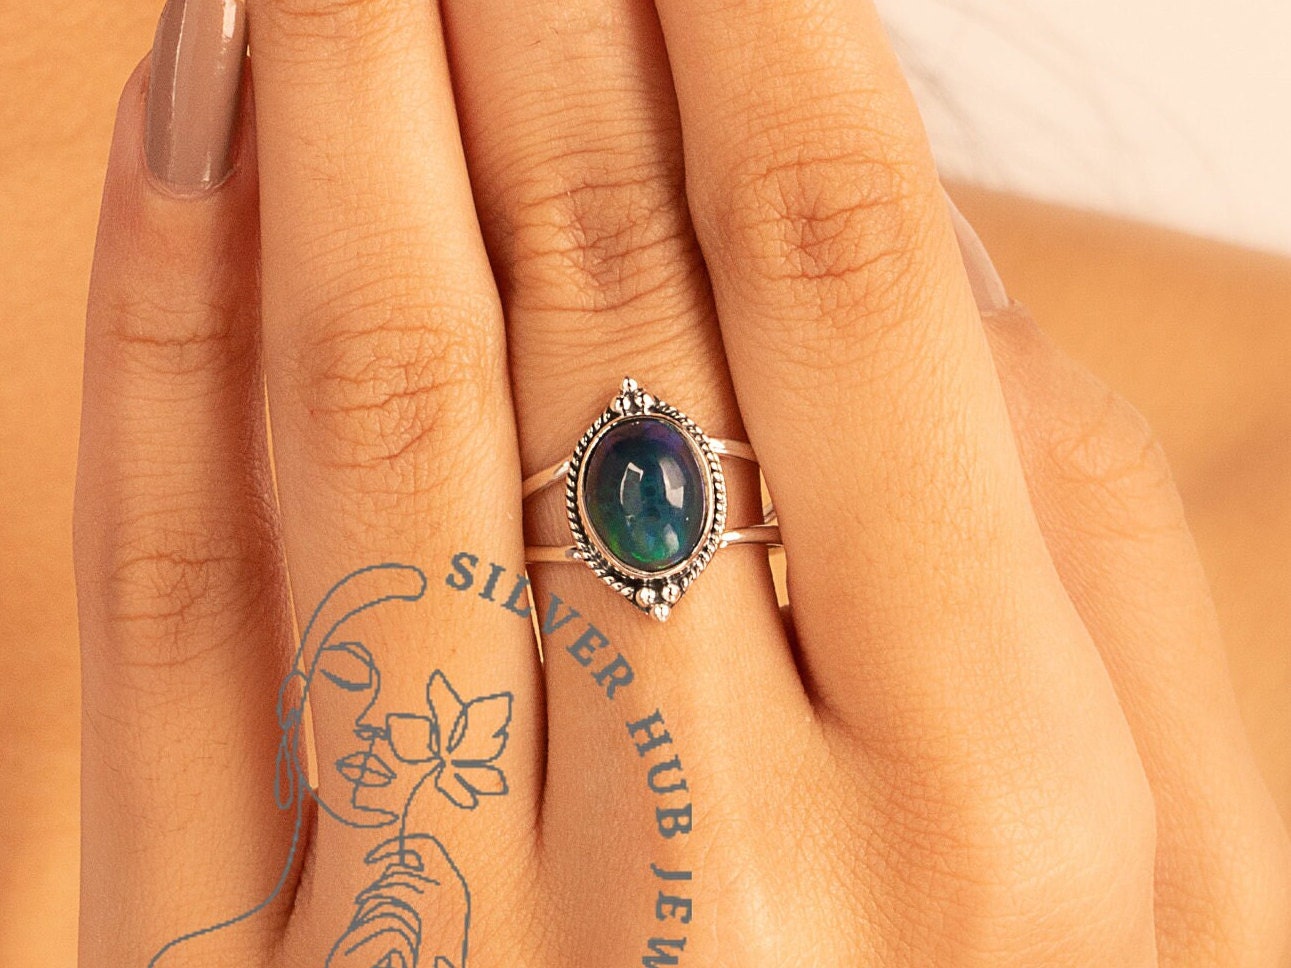 Rare Opal Ring, Gemstone Ring, Band Ring, 925 Sterling Silver Jewelry, Anniversary Gift, Ring For Mother